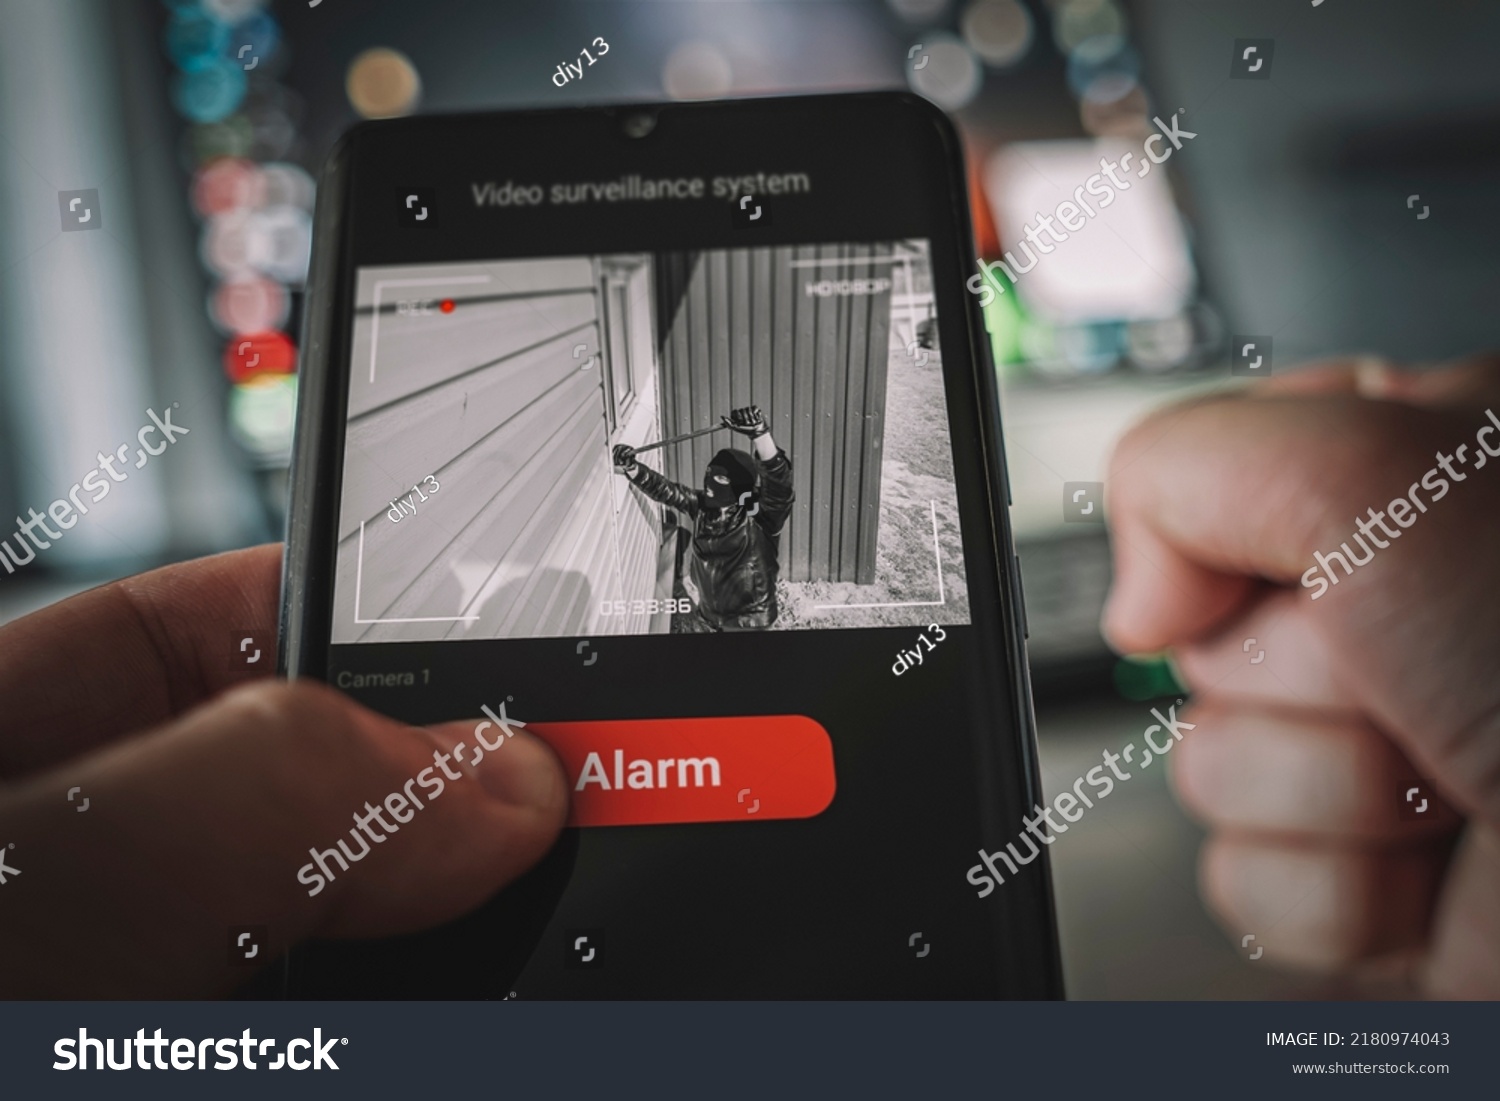 Protection of private residential building with help of an external video surveillance system. an application on smartphone screen. CCTV view of burglar breaking into home through window with crowbar. #2180974043